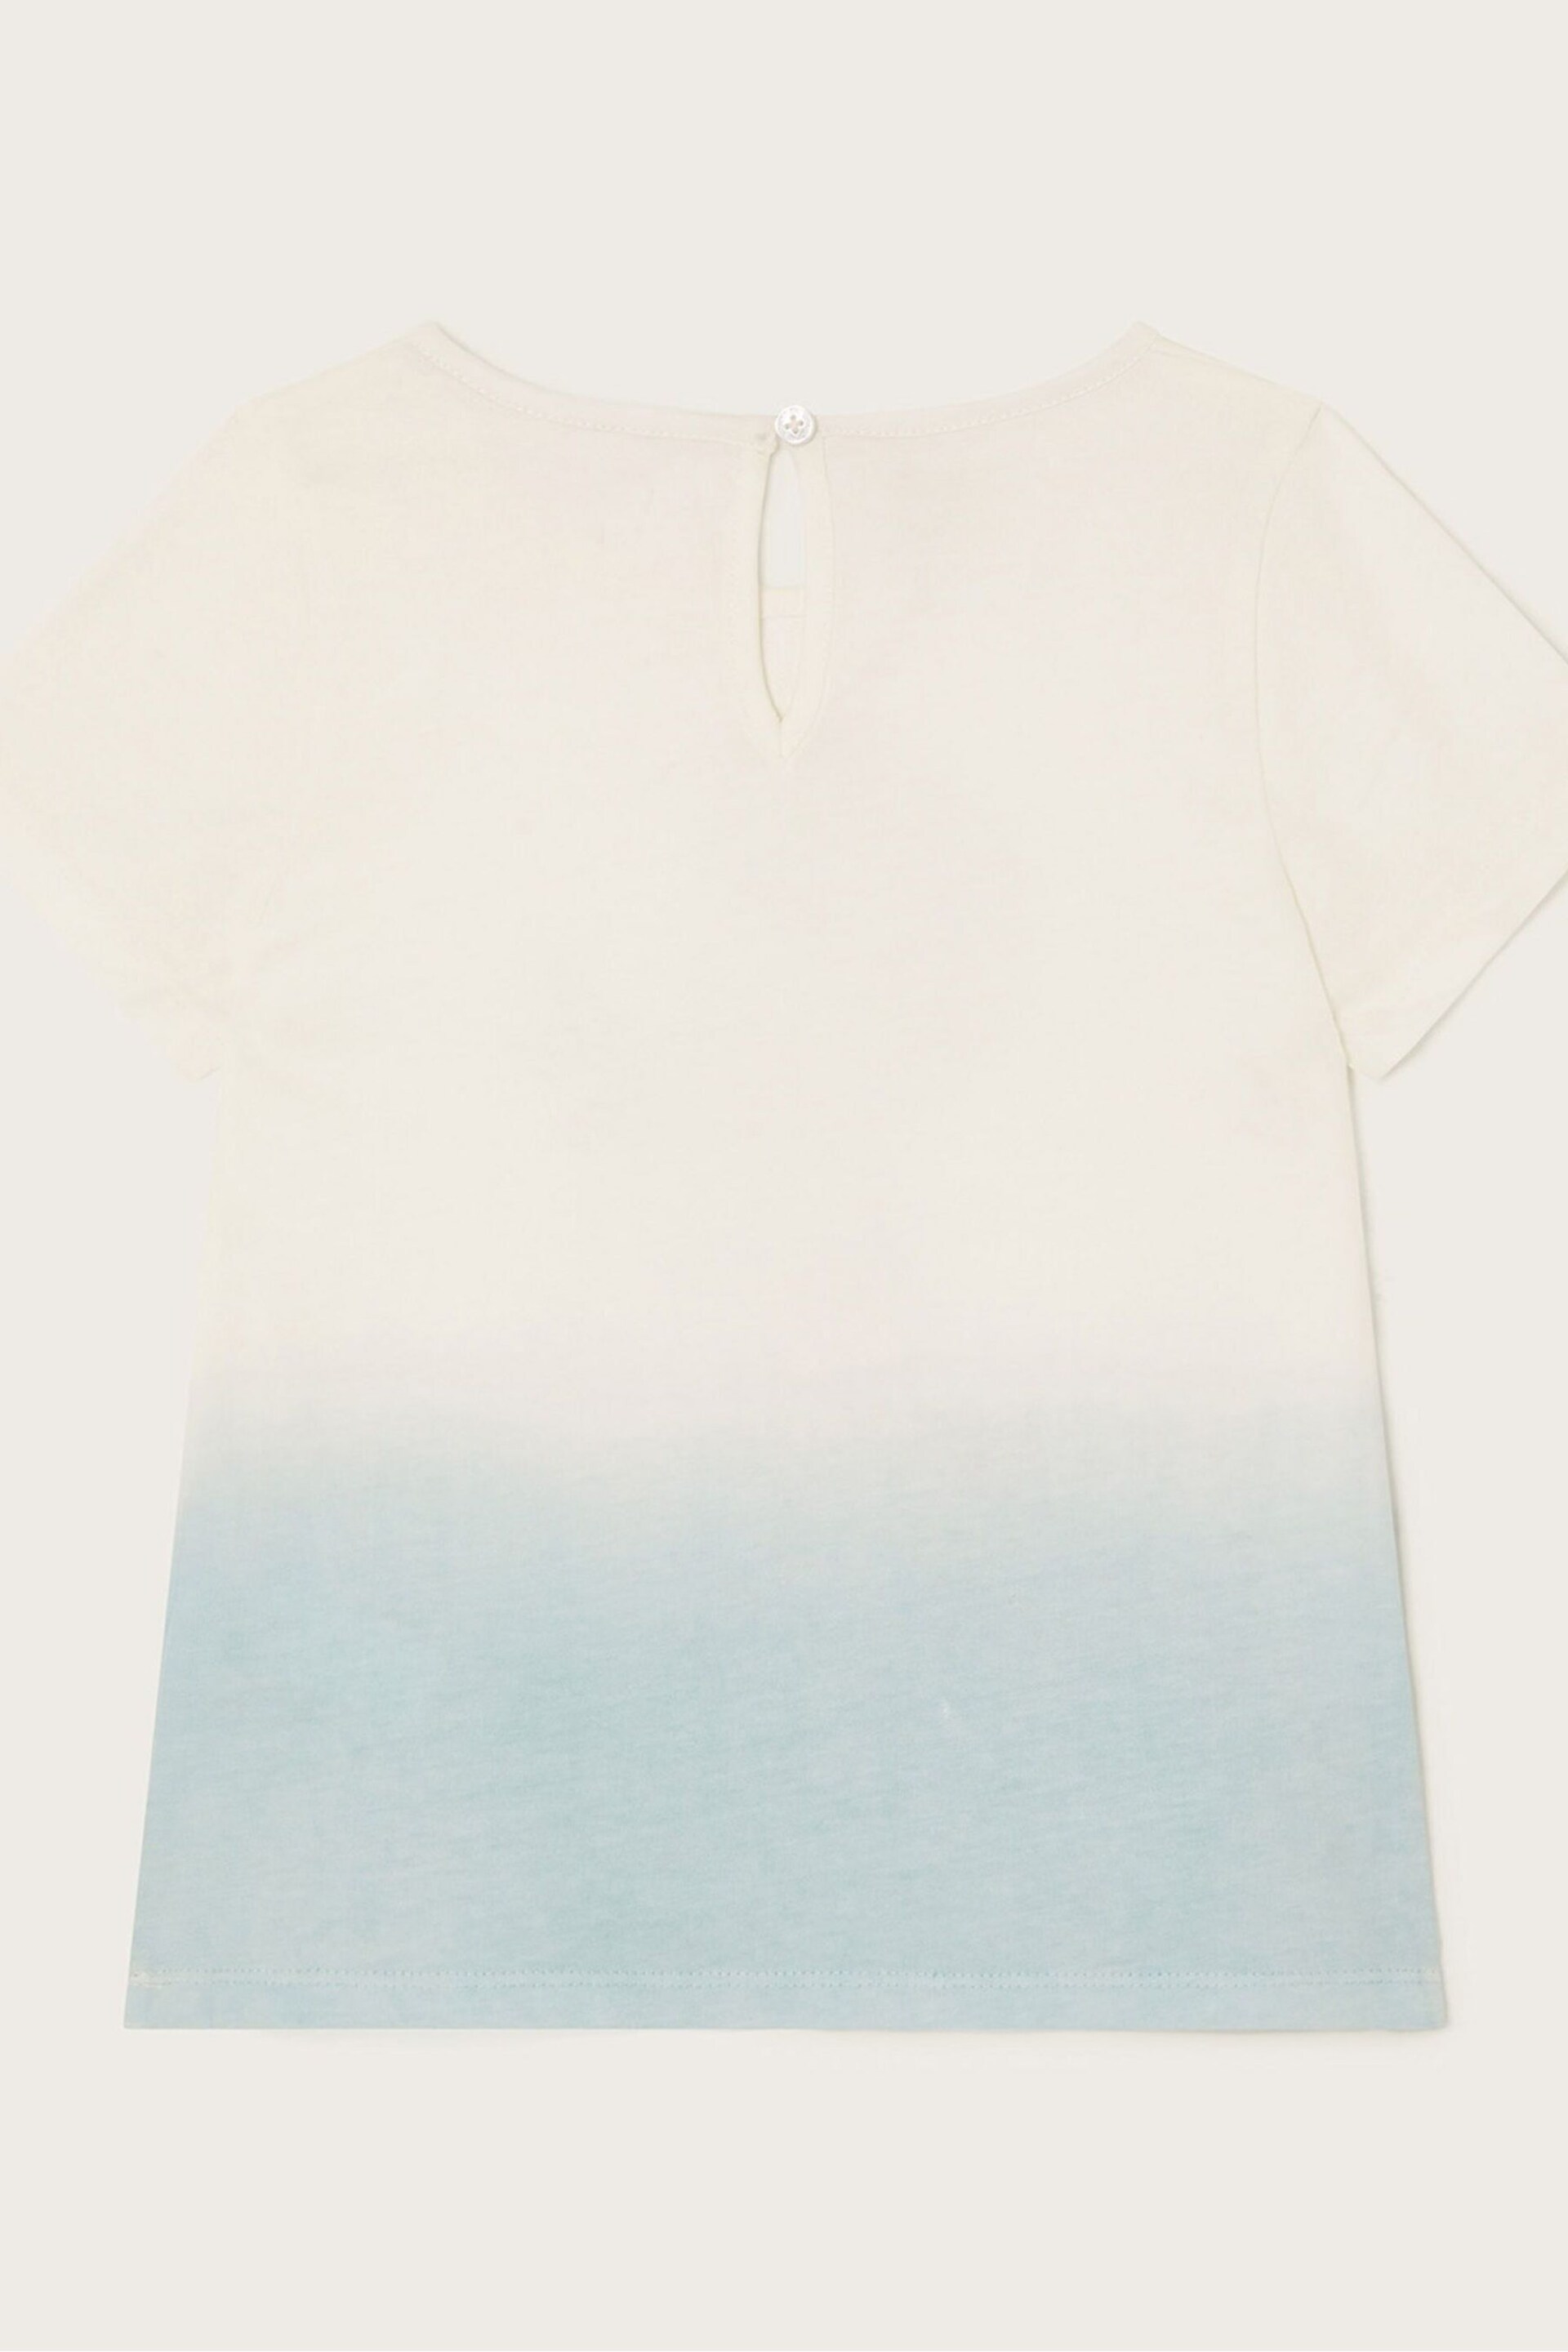 Monsoon Blue Ombre Mermaid T-Shirt - Image 2 of 3